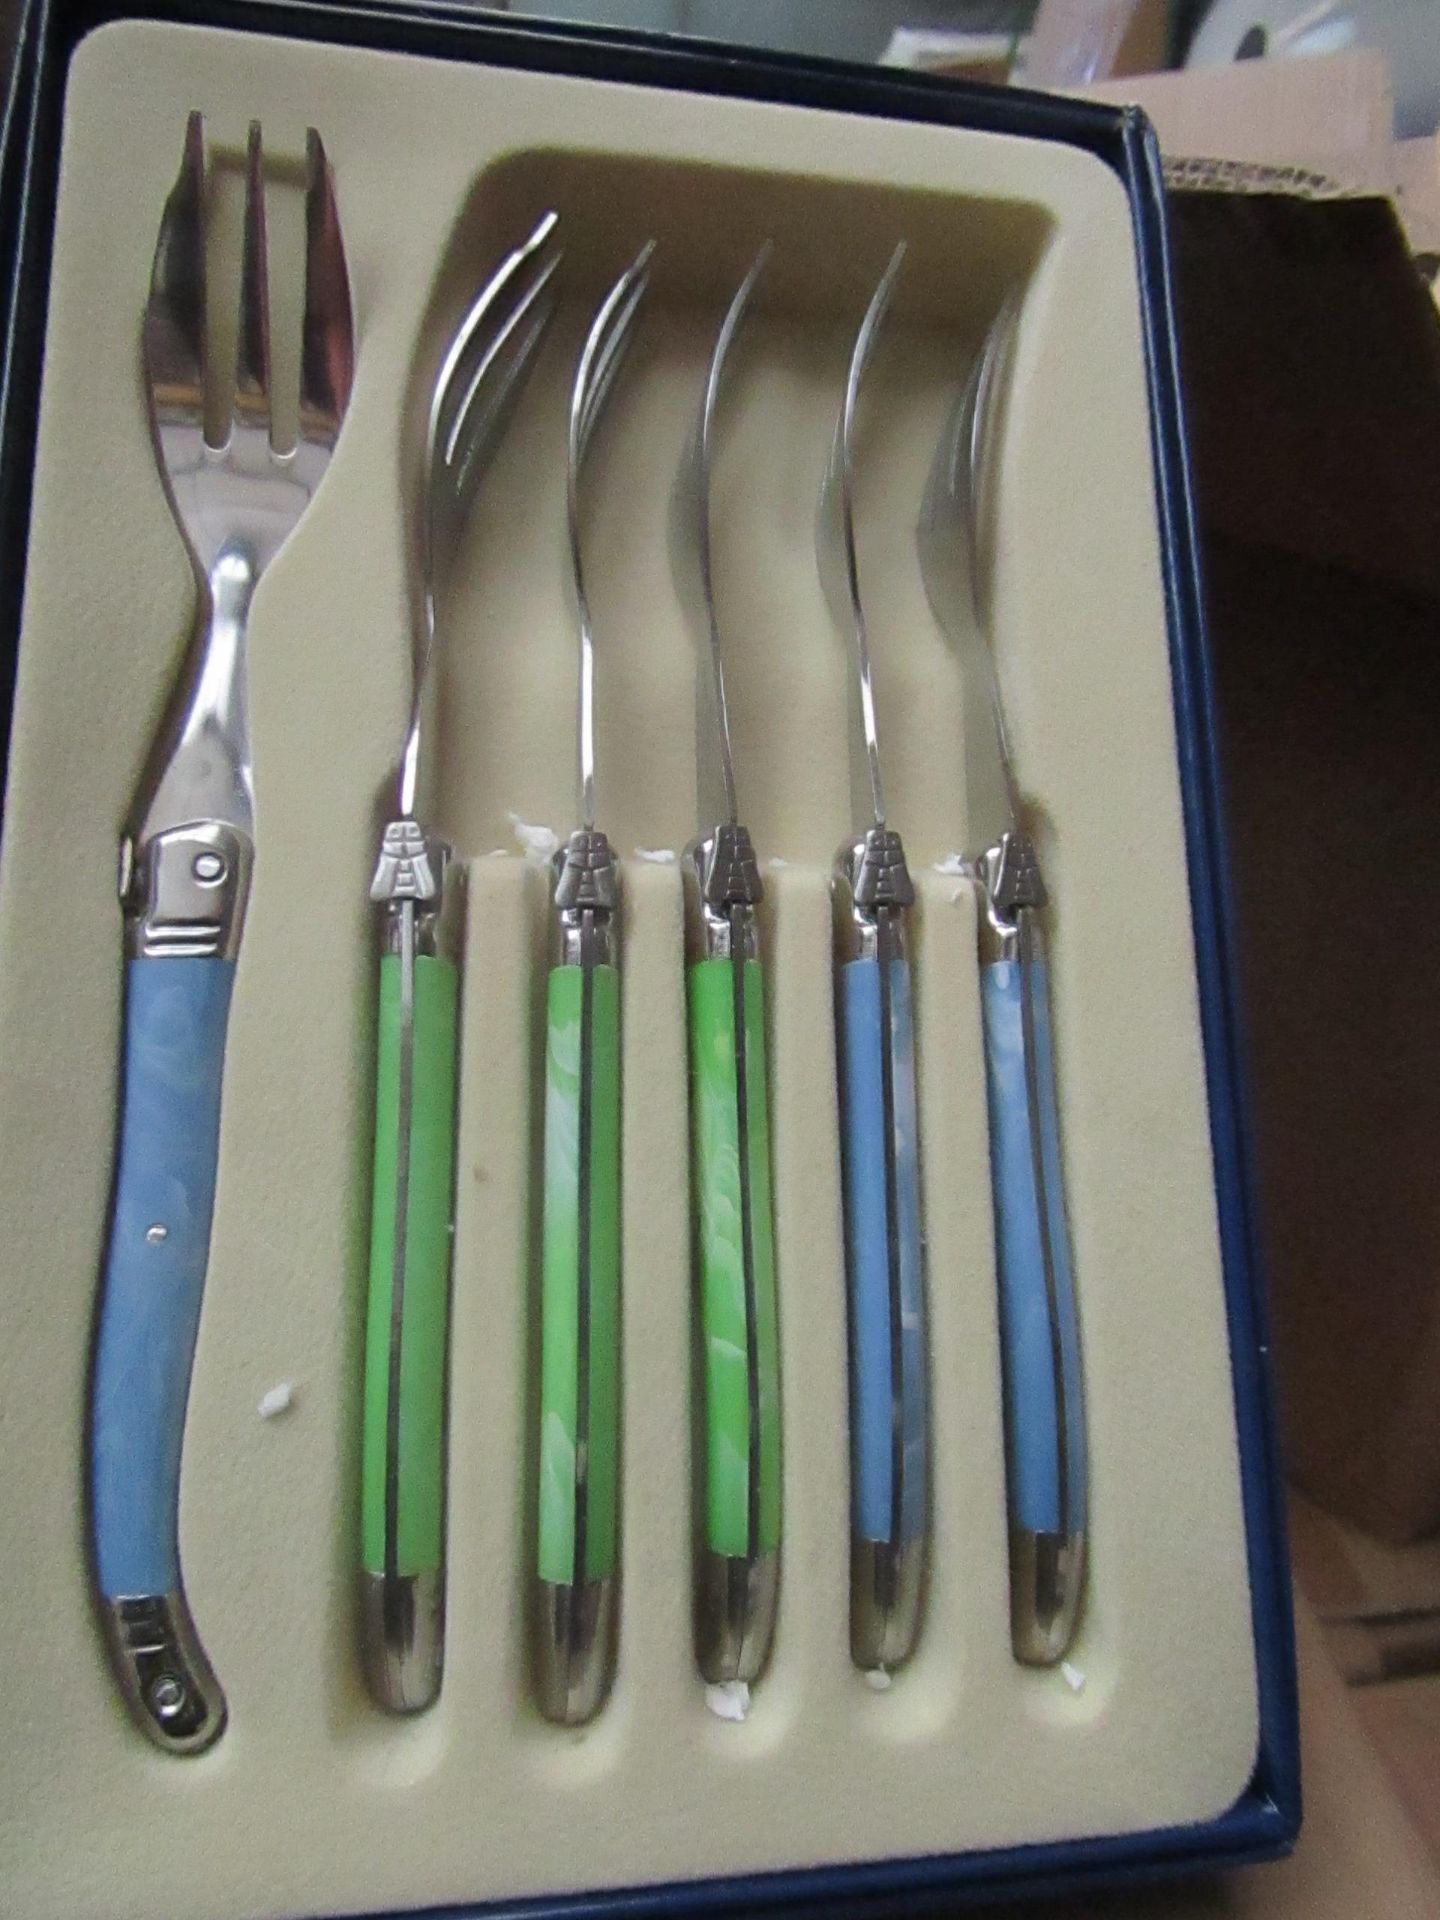 6x Laguiole - Cake Forks (6 Forks Per Box) Blue & Green - Unused & Boxed.